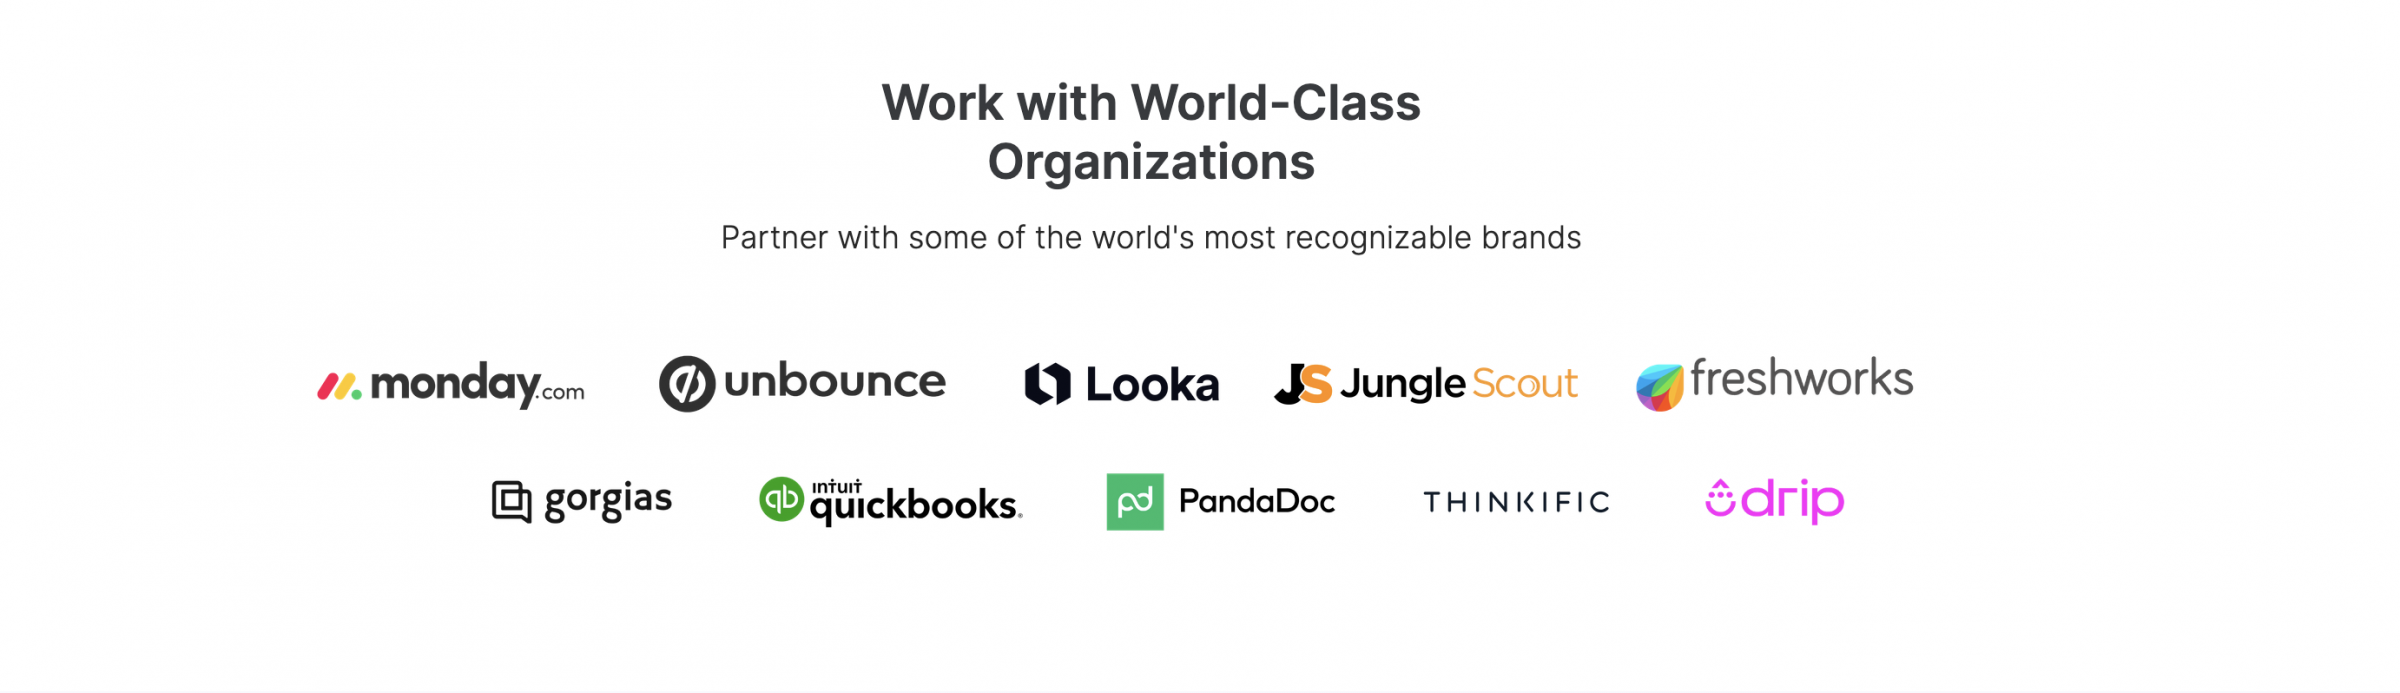 world-class-orgs-to-work-with-png.31056